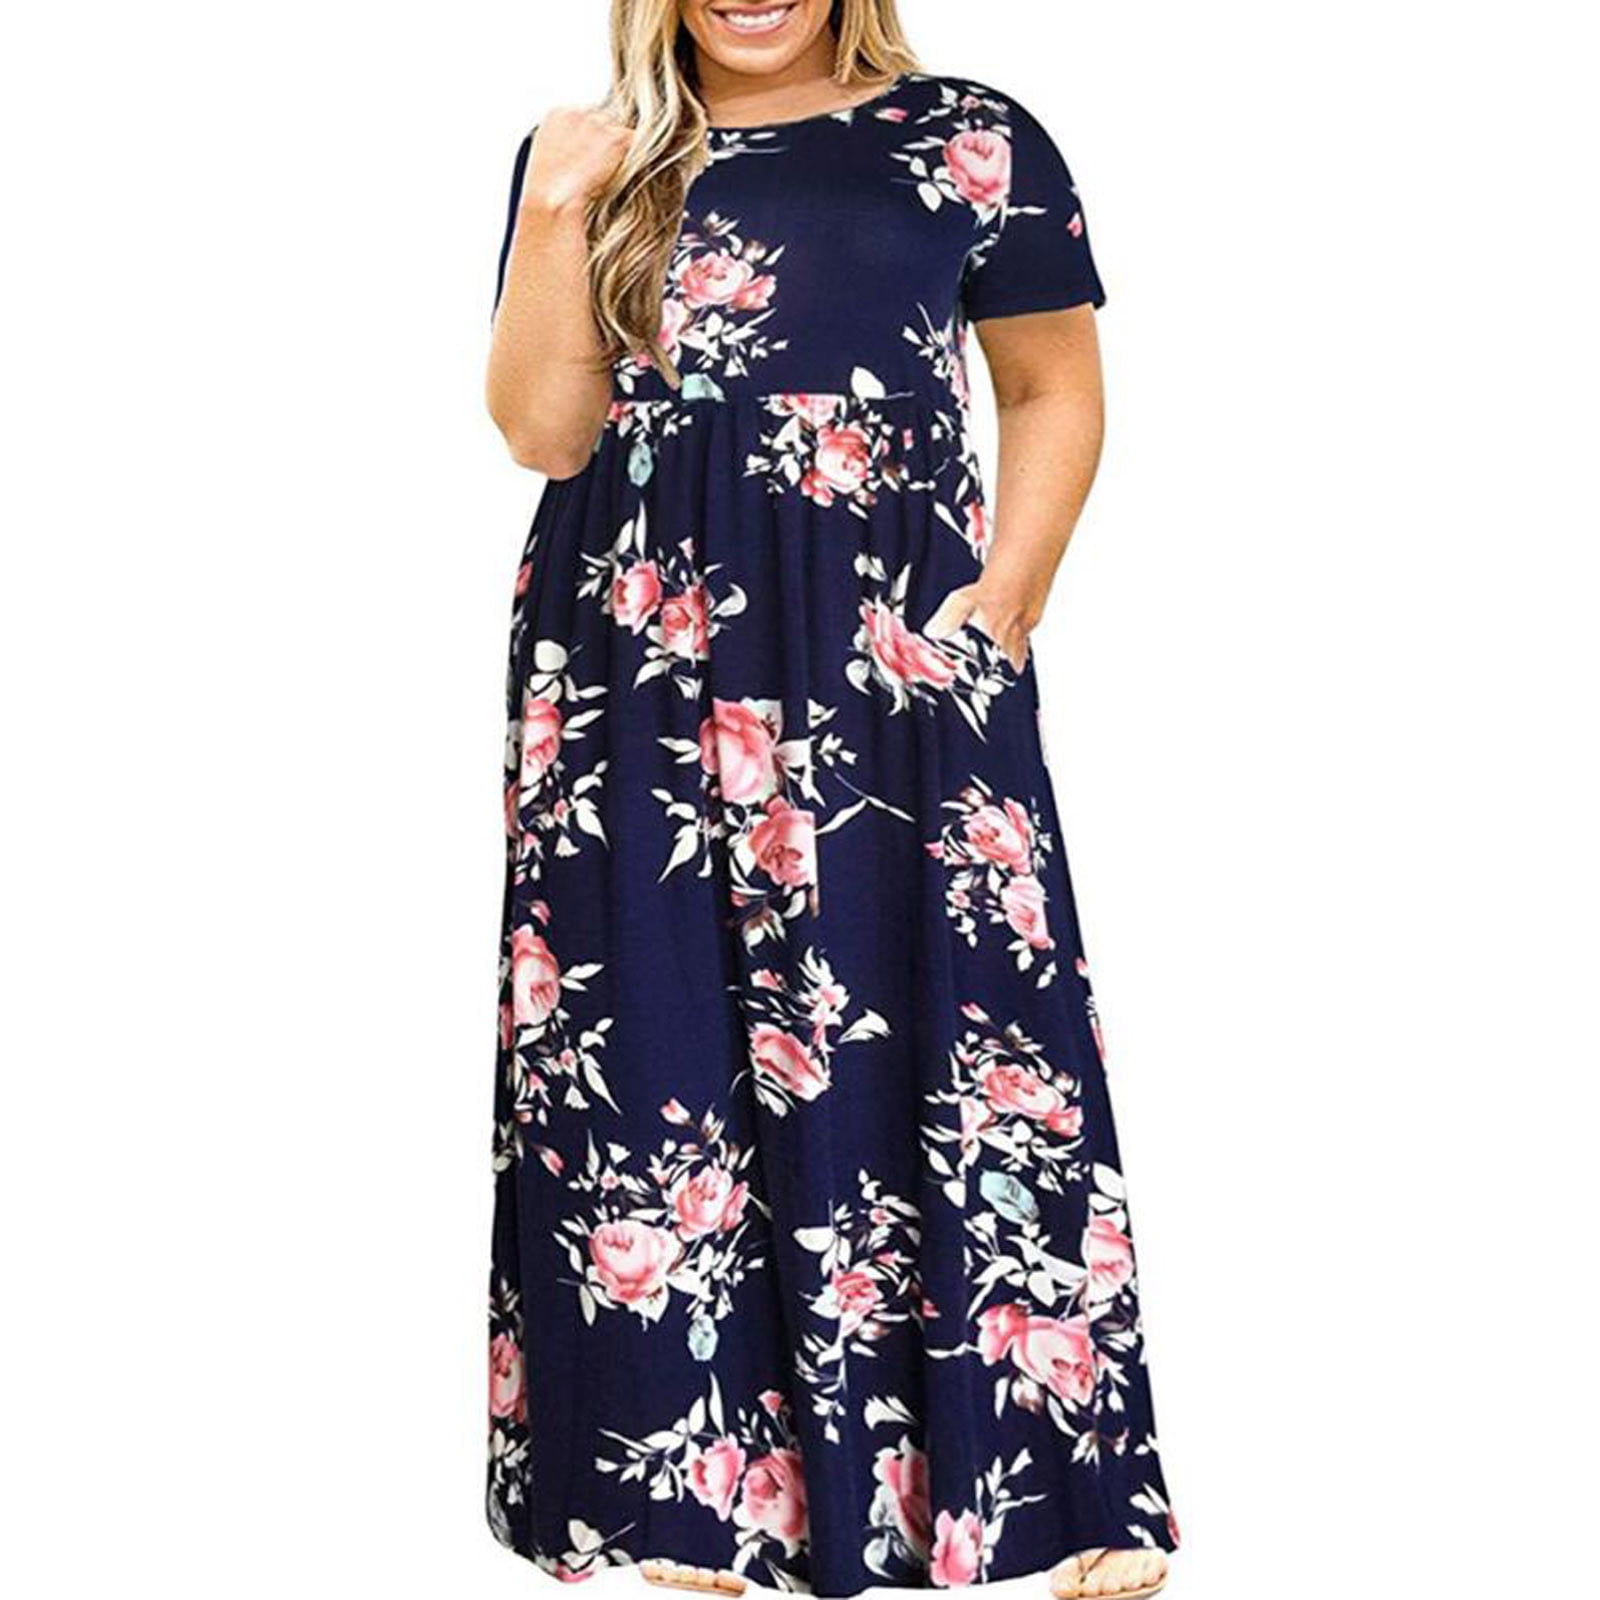 Ichuanyi Clearance Summer Dresses Plus Size Women Casual O-Neck Summer ...